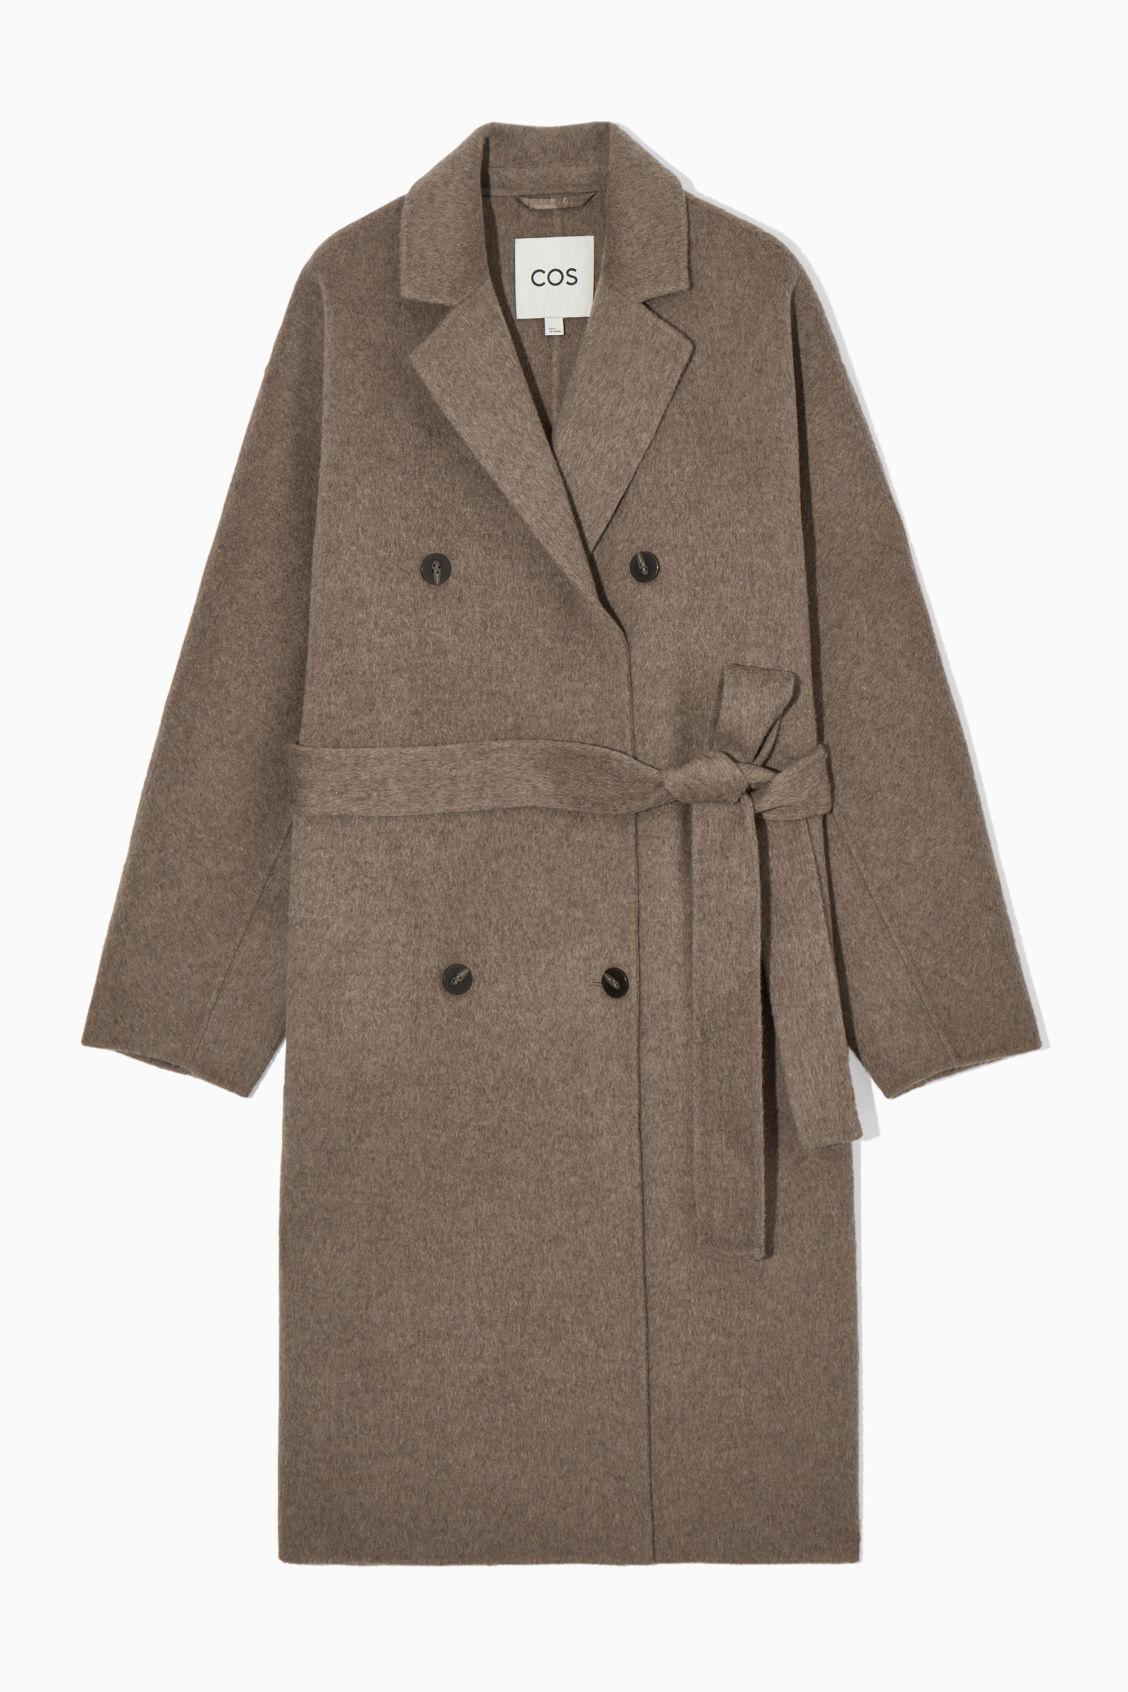 COS Oversized Double-breasted Wool Coat in Brown | Lyst